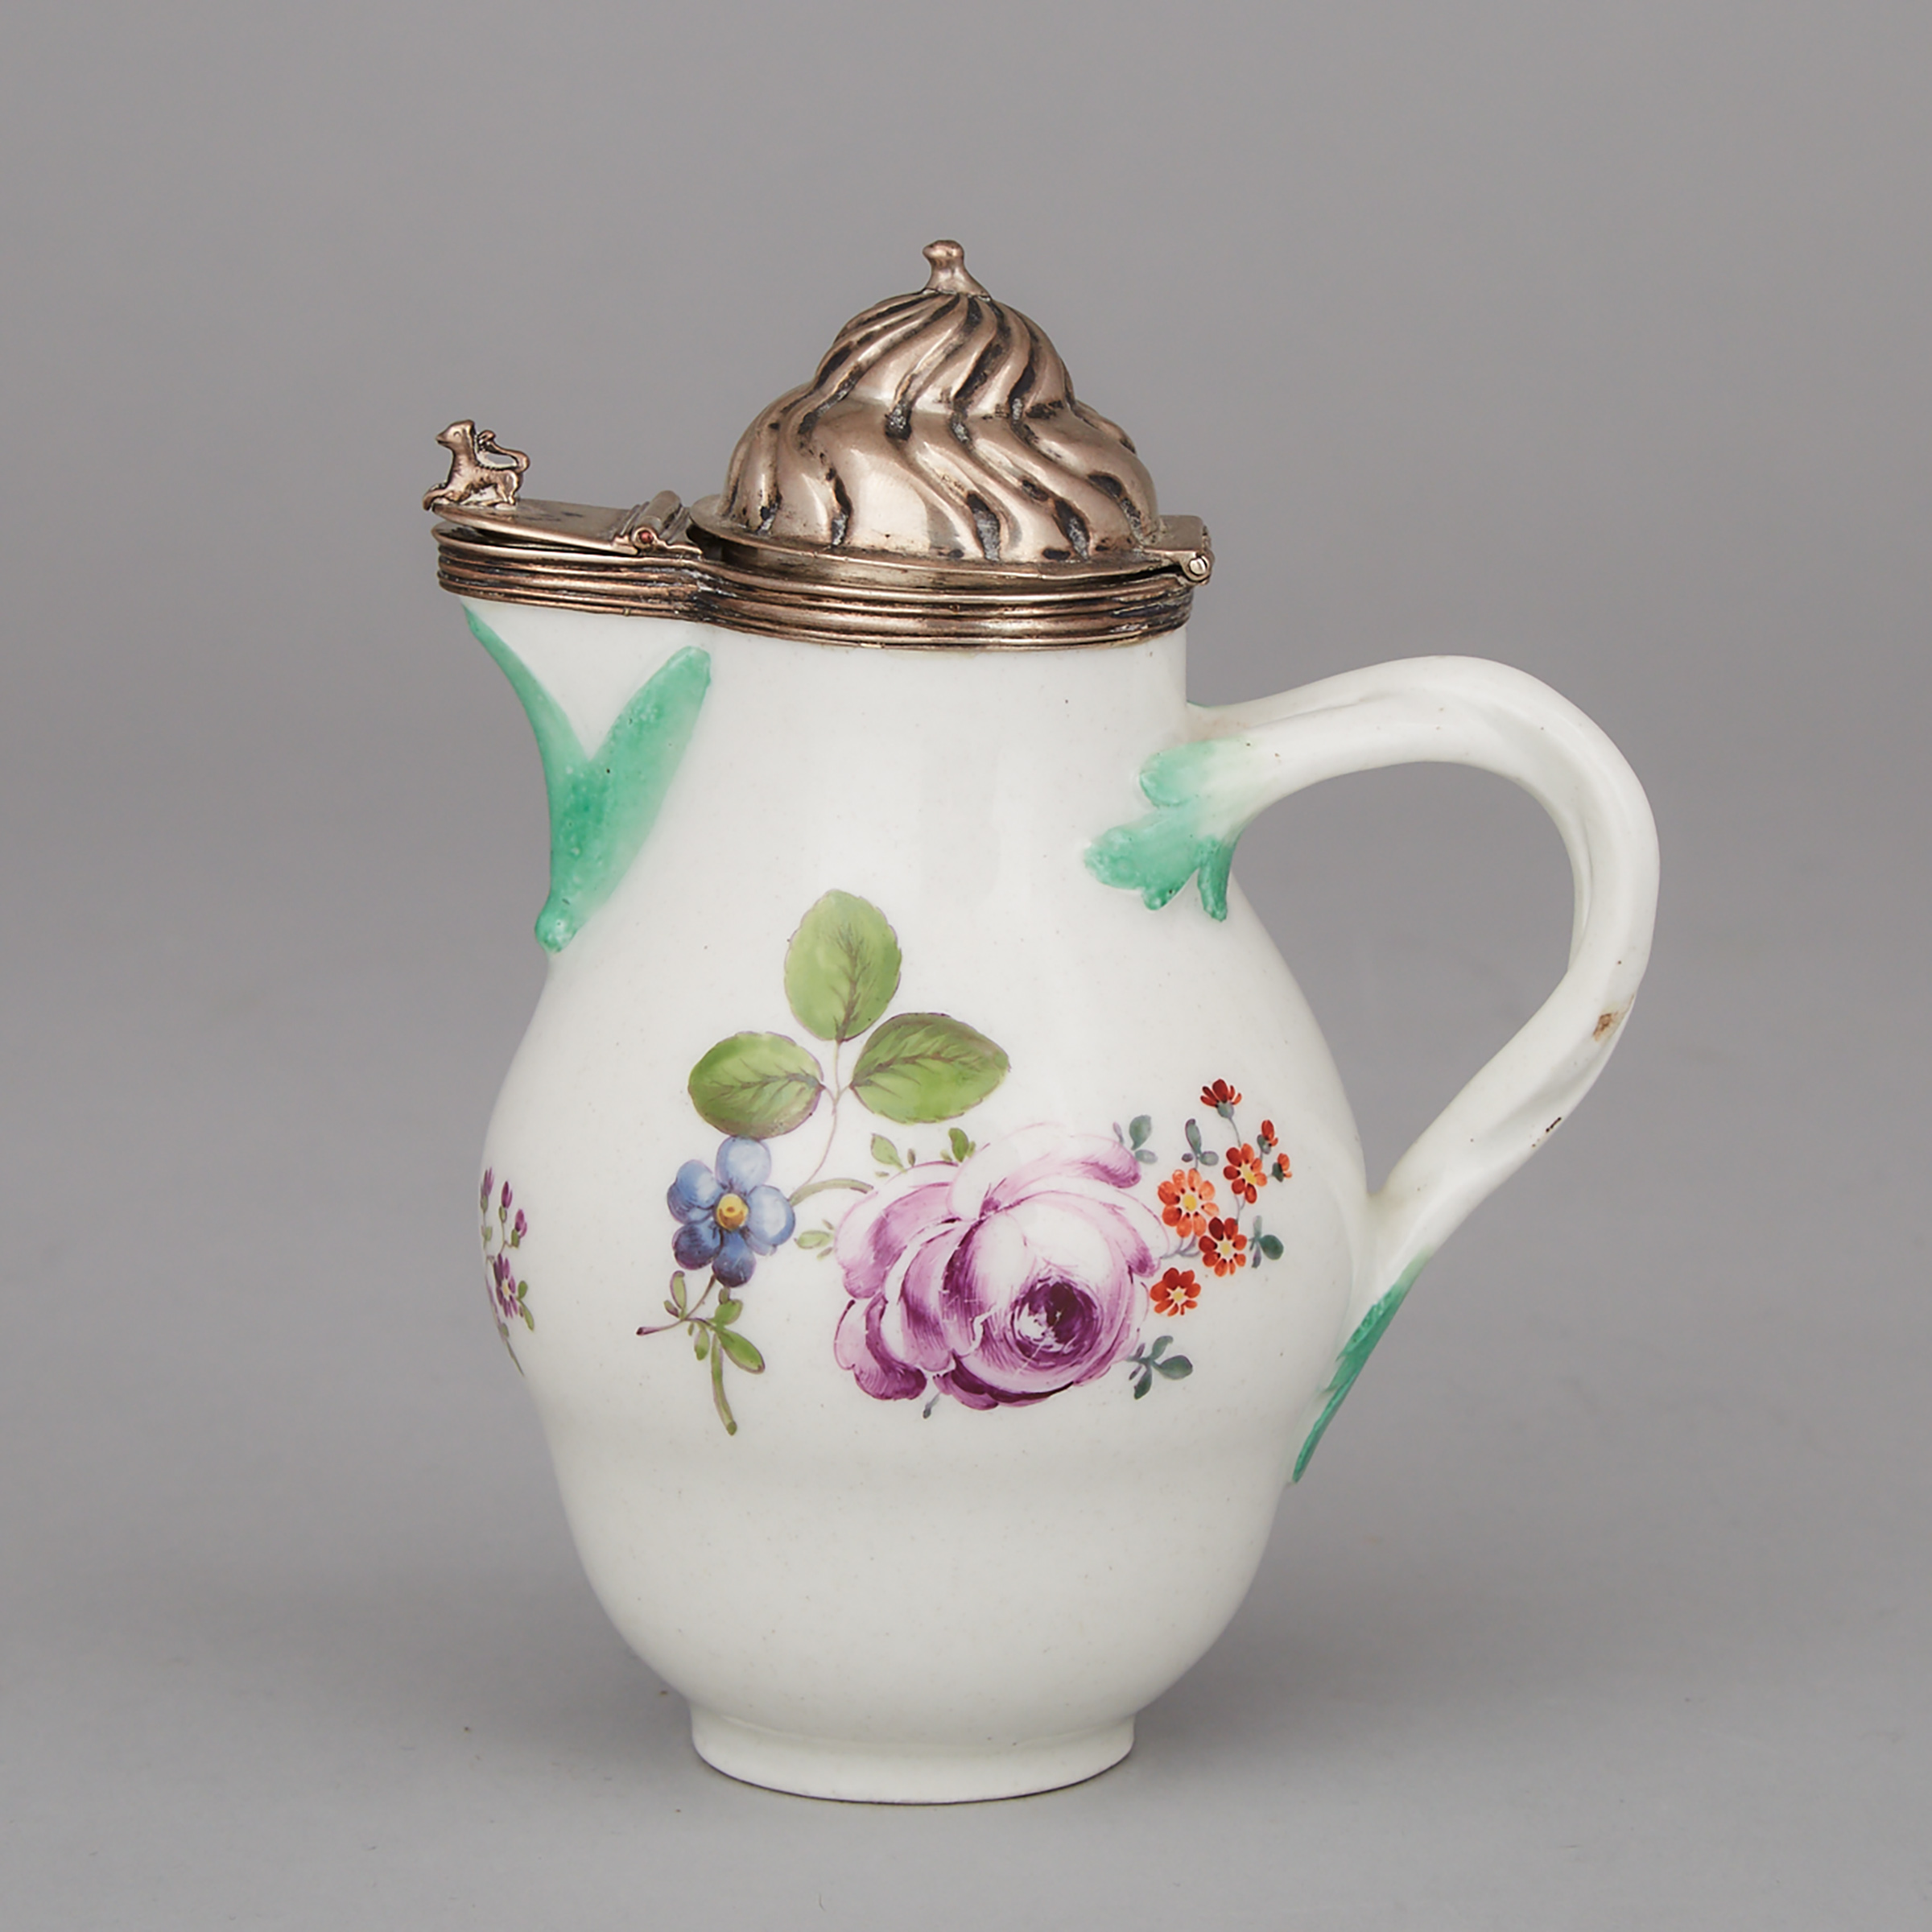 Volkstedt Silver Mounted Cream Jug, c.1770